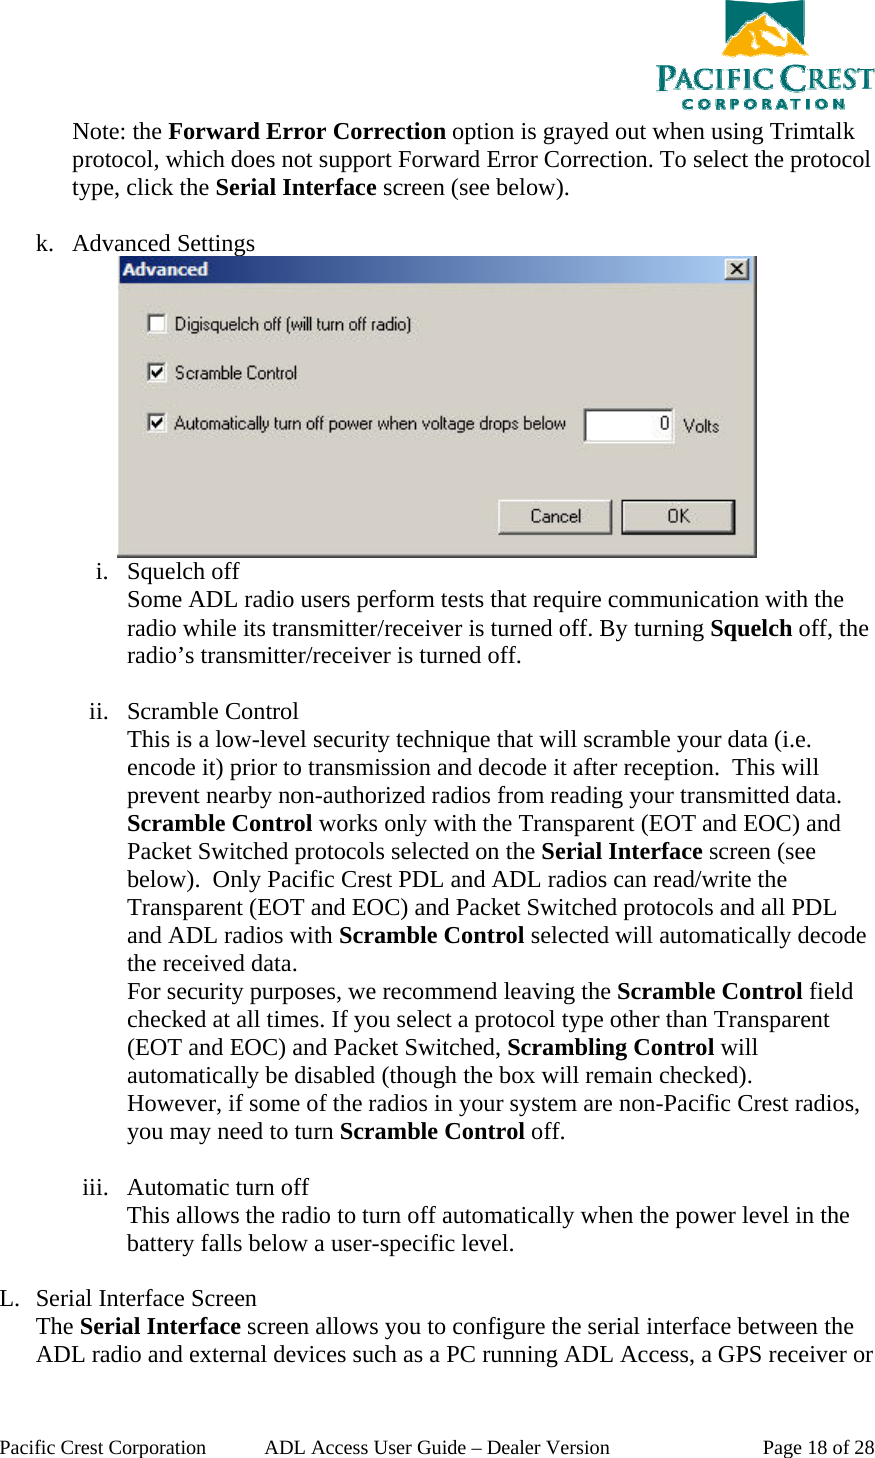  Pacific Crest Corporation  ADL Access User Guide – Dealer Version  Page 18 of 28 Note: the Forward Error Correction option is grayed out when using Trimtalk protocol, which does not support Forward Error Correction. To select the protocol type, click the Serial Interface screen (see below).  k. Advanced Settings  i. Squelch off Some ADL radio users perform tests that require communication with the radio while its transmitter/receiver is turned off. By turning Squelch off, the radio’s transmitter/receiver is turned off.  ii. Scramble Control This is a low-level security technique that will scramble your data (i.e. encode it) prior to transmission and decode it after reception.  This will prevent nearby non-authorized radios from reading your transmitted data.  Scramble Control works only with the Transparent (EOT and EOC) and Packet Switched protocols selected on the Serial Interface screen (see below).  Only Pacific Crest PDL and ADL radios can read/write the Transparent (EOT and EOC) and Packet Switched protocols and all PDL and ADL radios with Scramble Control selected will automatically decode the received data. For security purposes, we recommend leaving the Scramble Control field checked at all times. If you select a protocol type other than Transparent (EOT and EOC) and Packet Switched, Scrambling Control will automatically be disabled (though the box will remain checked).   However, if some of the radios in your system are non-Pacific Crest radios, you may need to turn Scramble Control off.  iii. Automatic turn off This allows the radio to turn off automatically when the power level in the battery falls below a user-specific level.  L. Serial Interface Screen The Serial Interface screen allows you to configure the serial interface between the ADL radio and external devices such as a PC running ADL Access, a GPS receiver or 